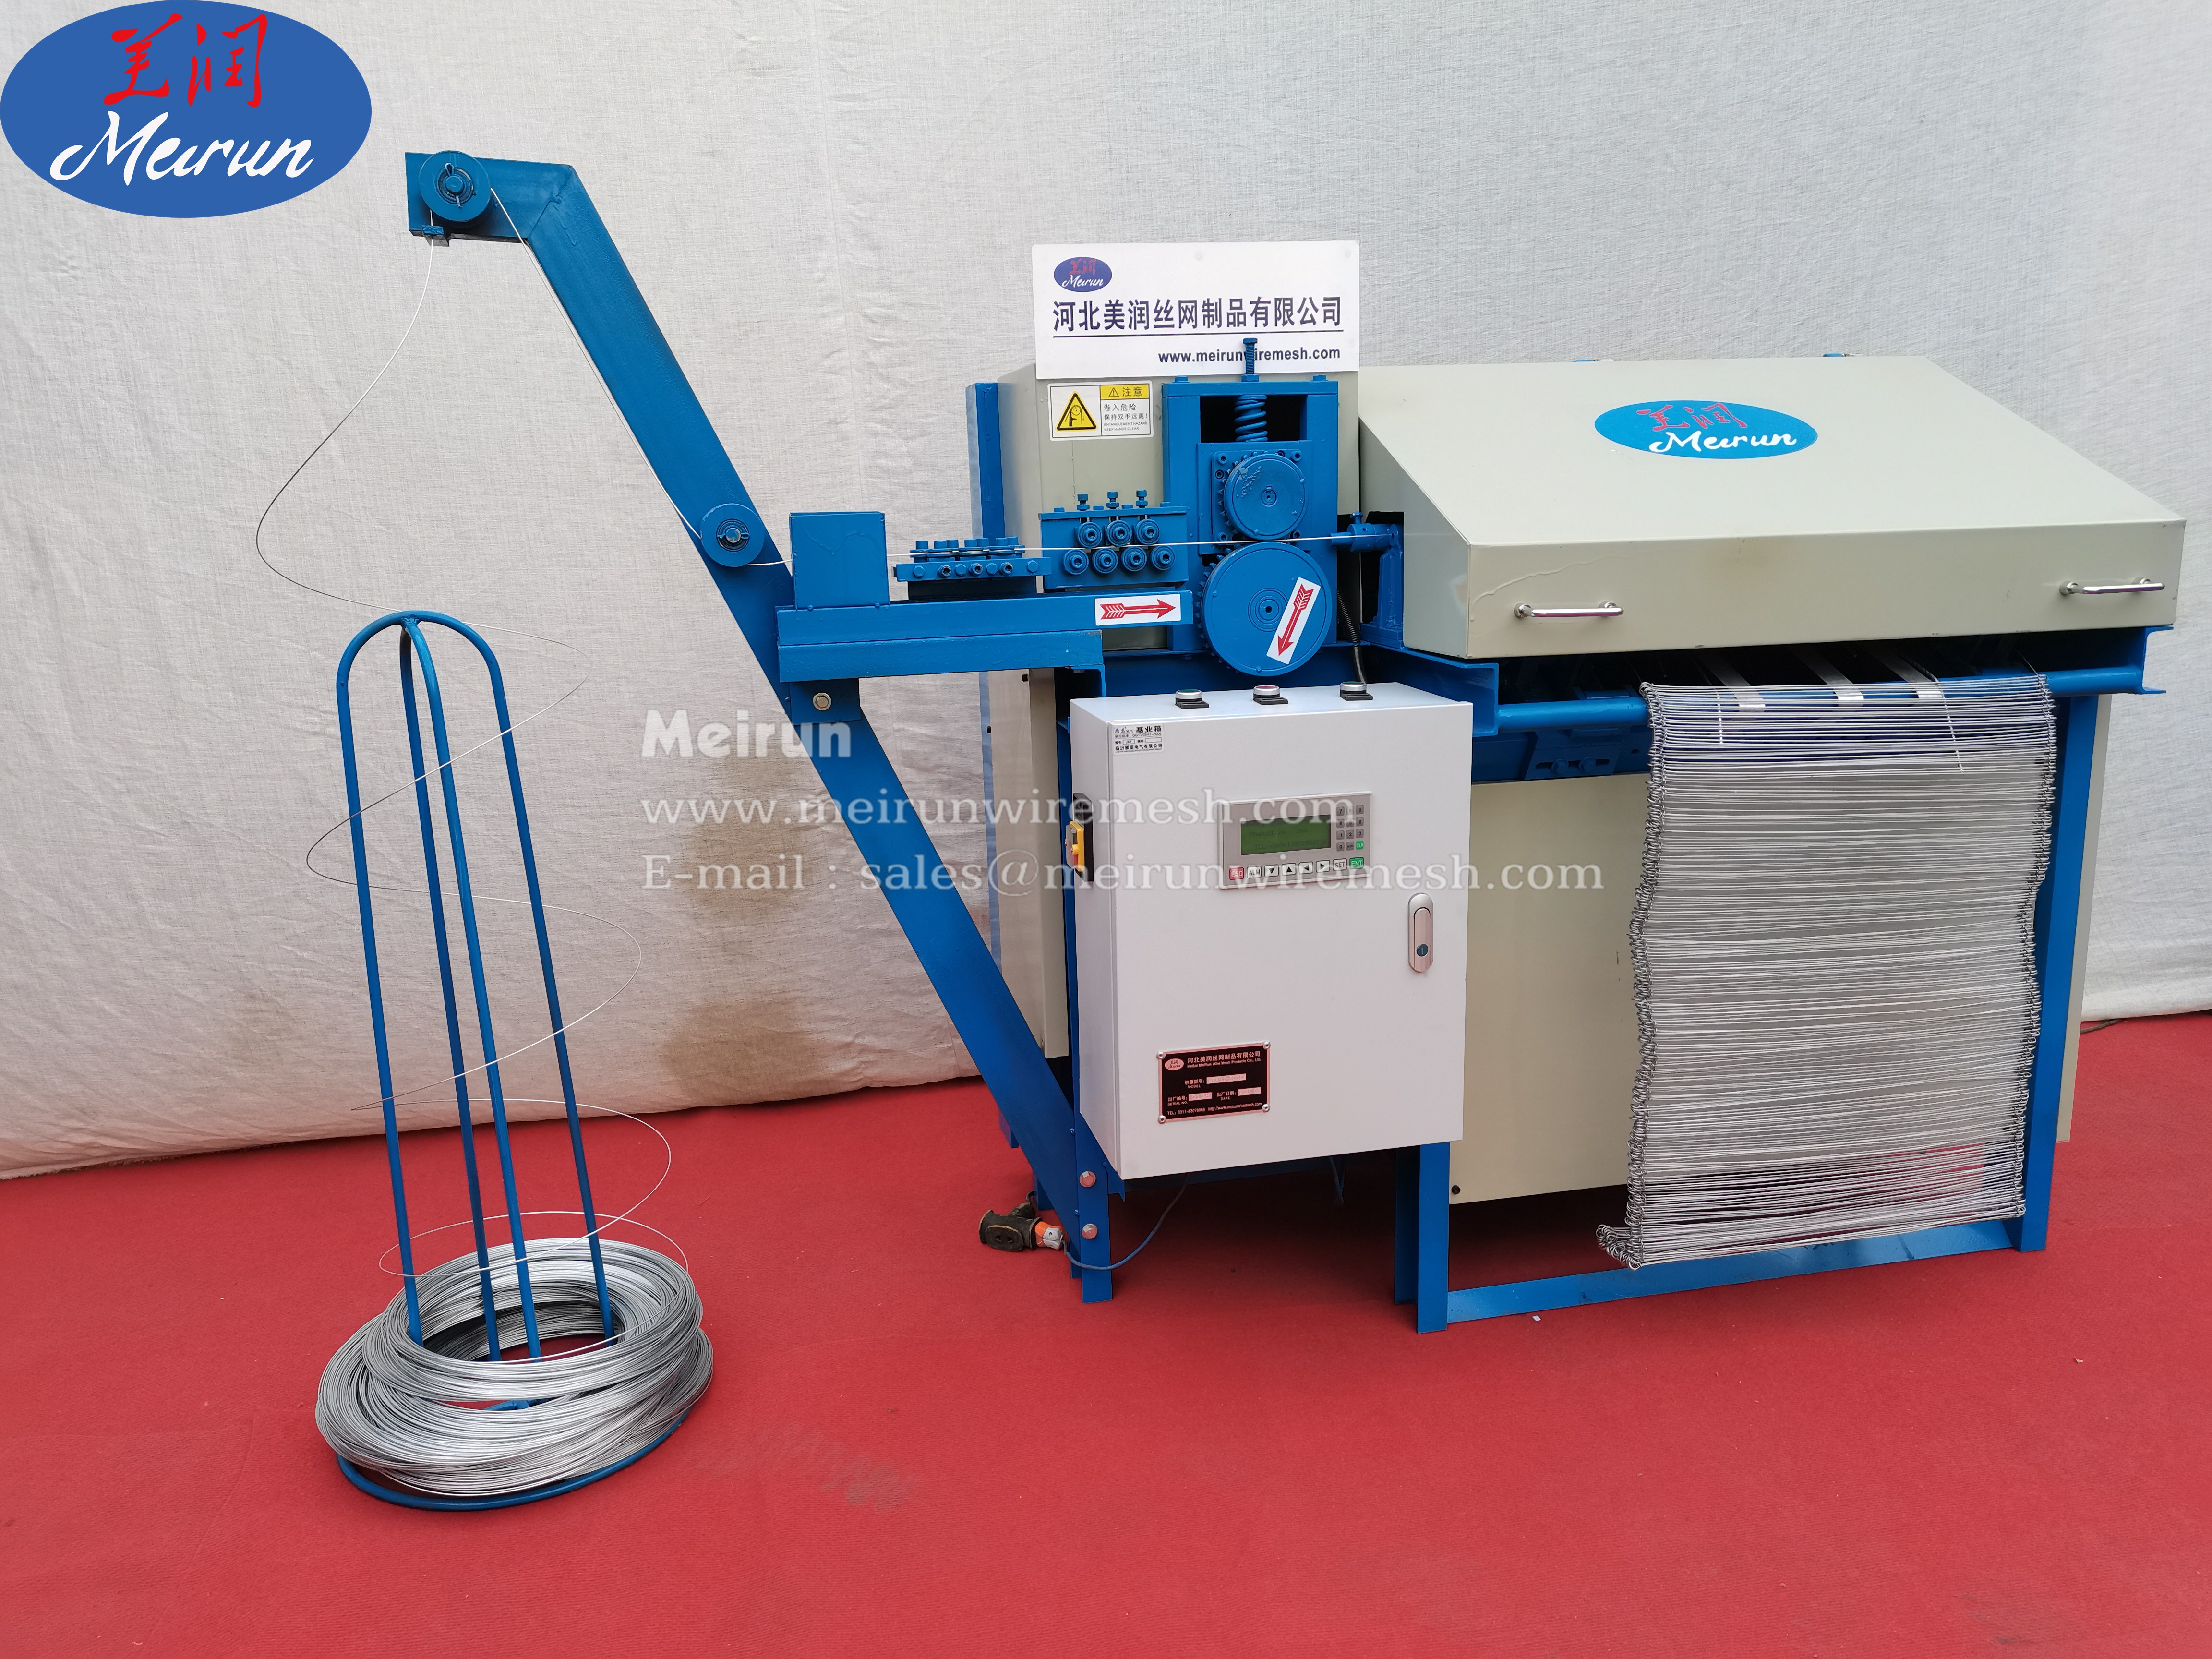 Hot Selling Double Loop Rebar Tie Wire Machine Made by China 